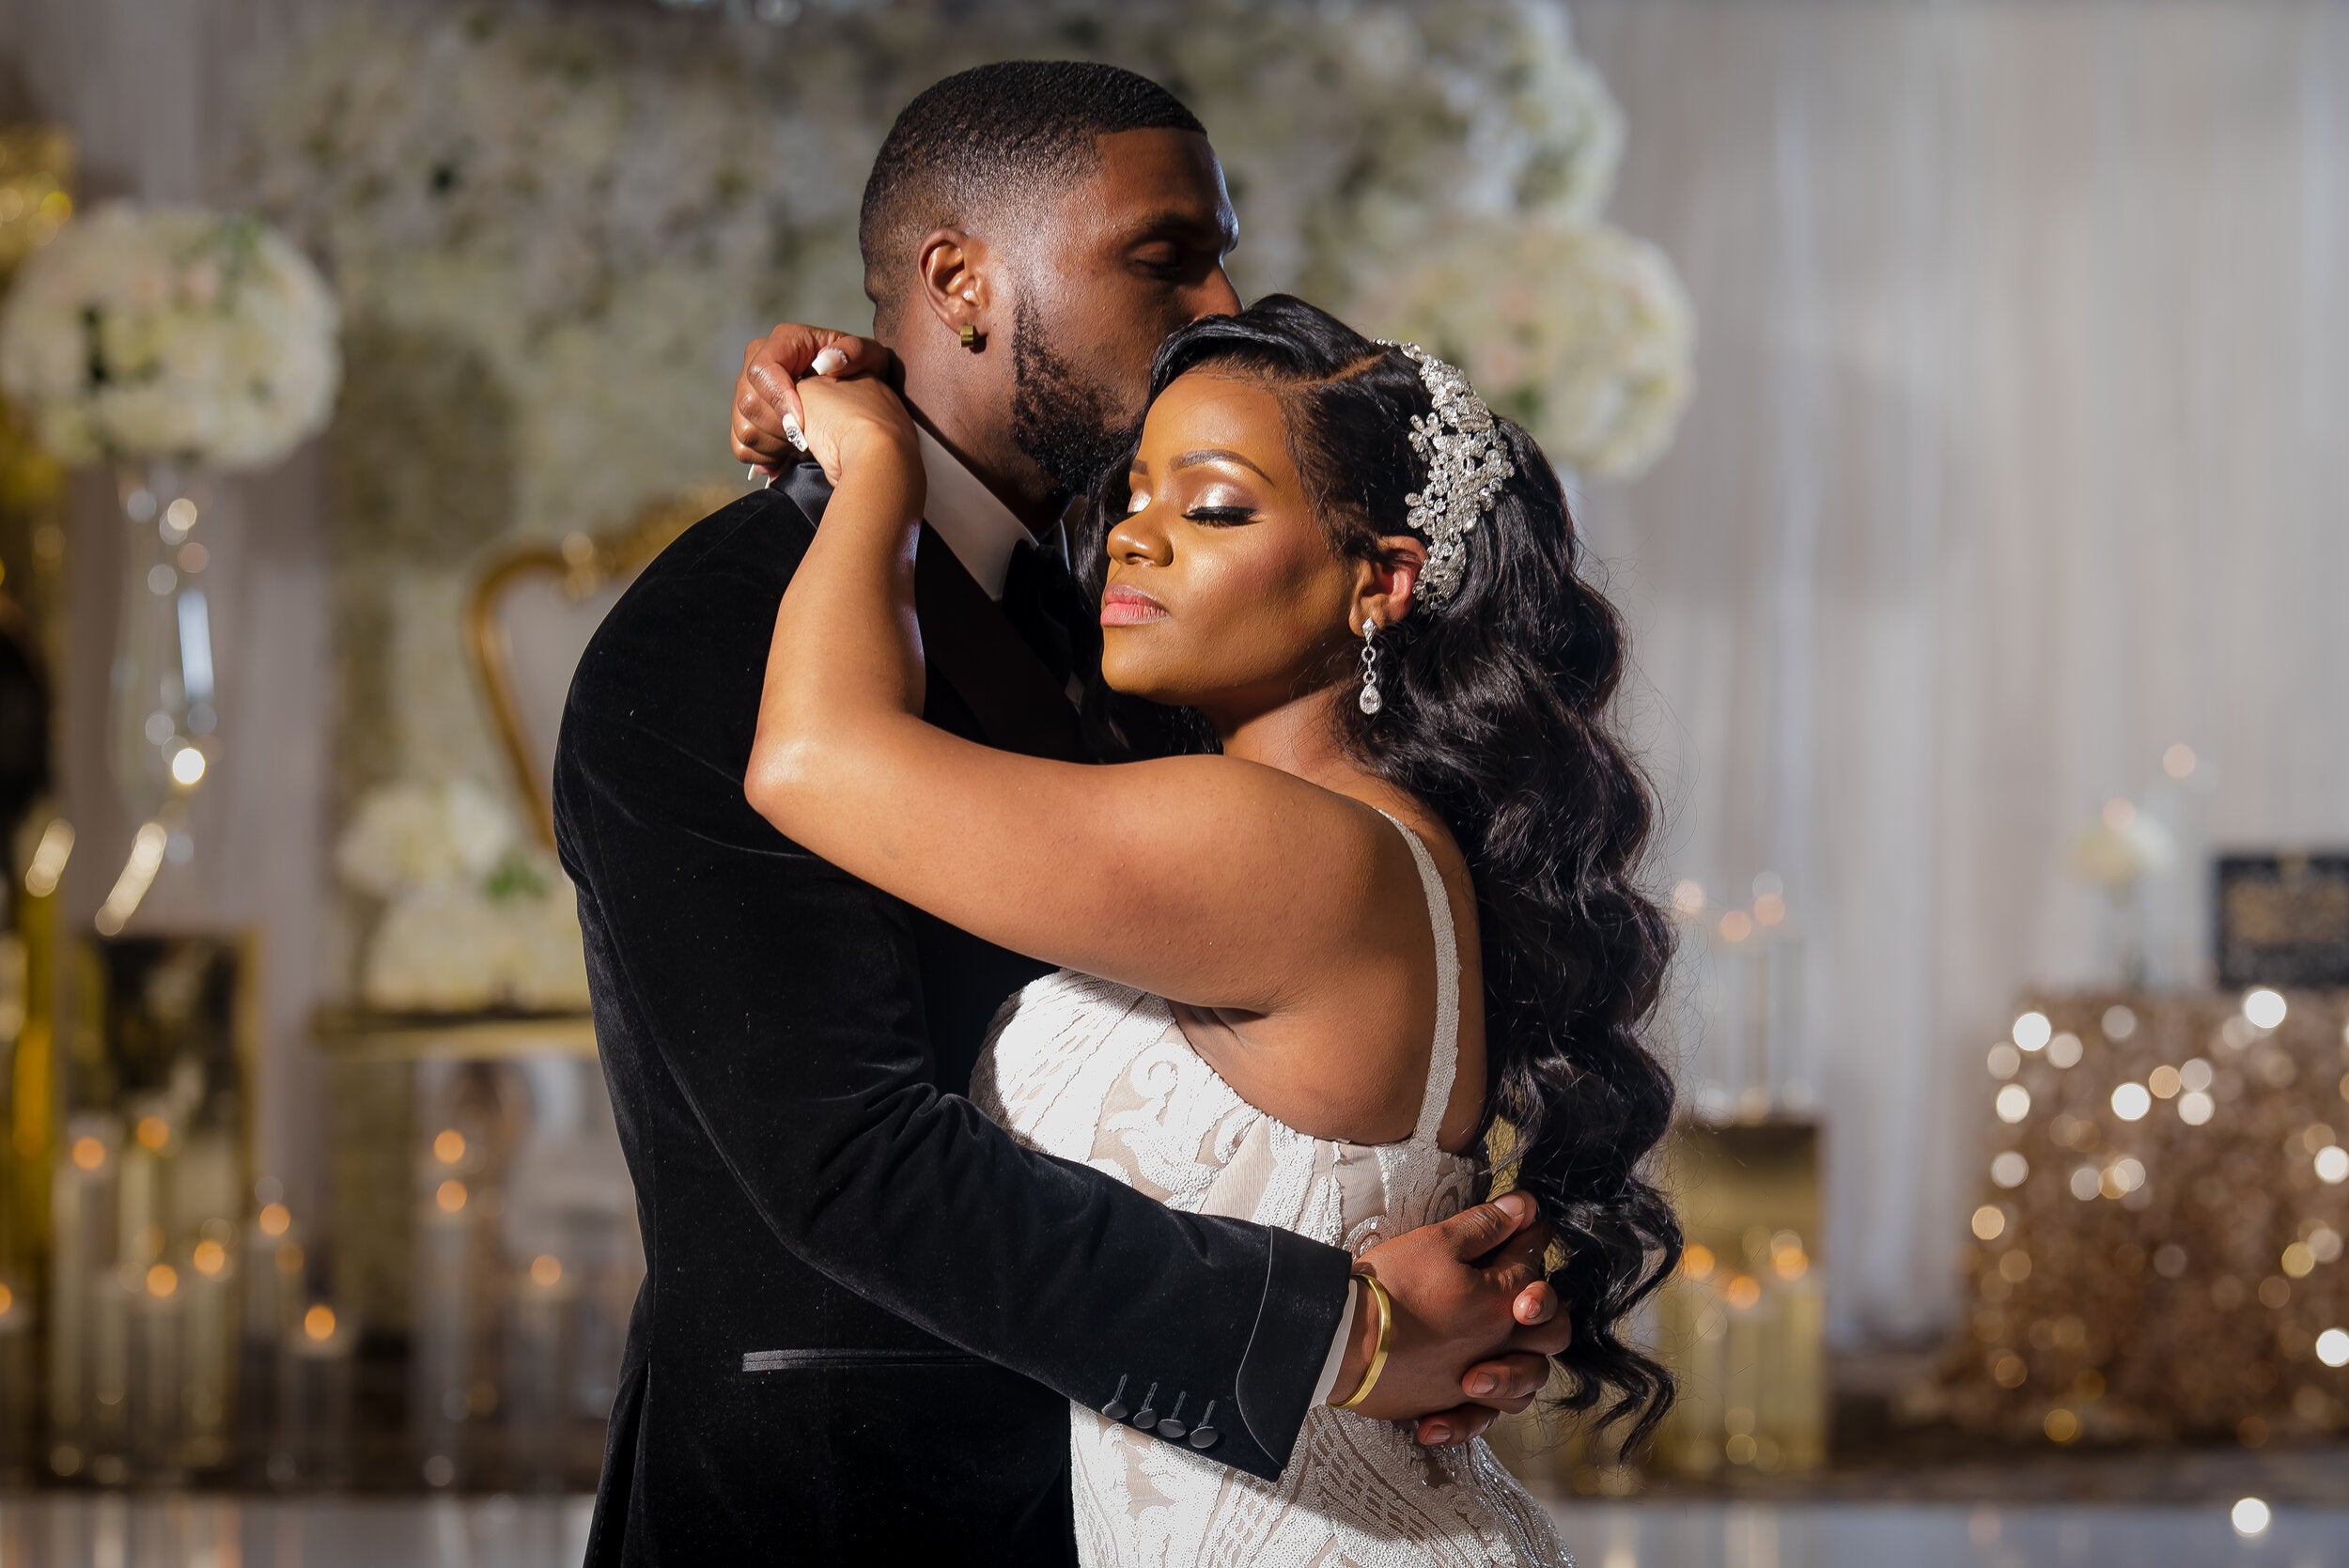 Bridal Bliss: Please Give Ayesha and Steven An Award For This Glam Wedding Affair